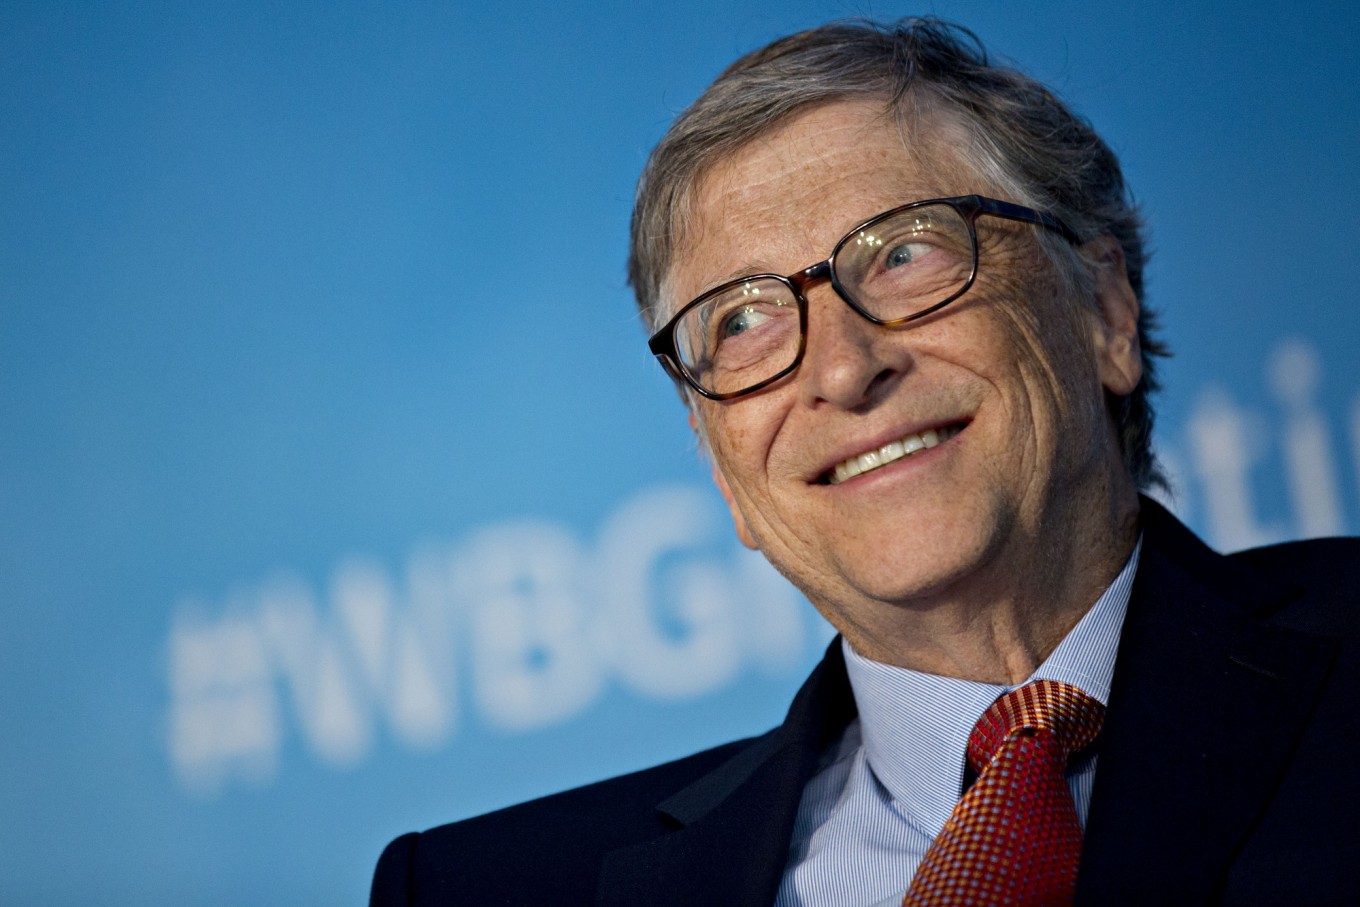 Bill Gates, founder of Microsoft and globally renowned philanthropist